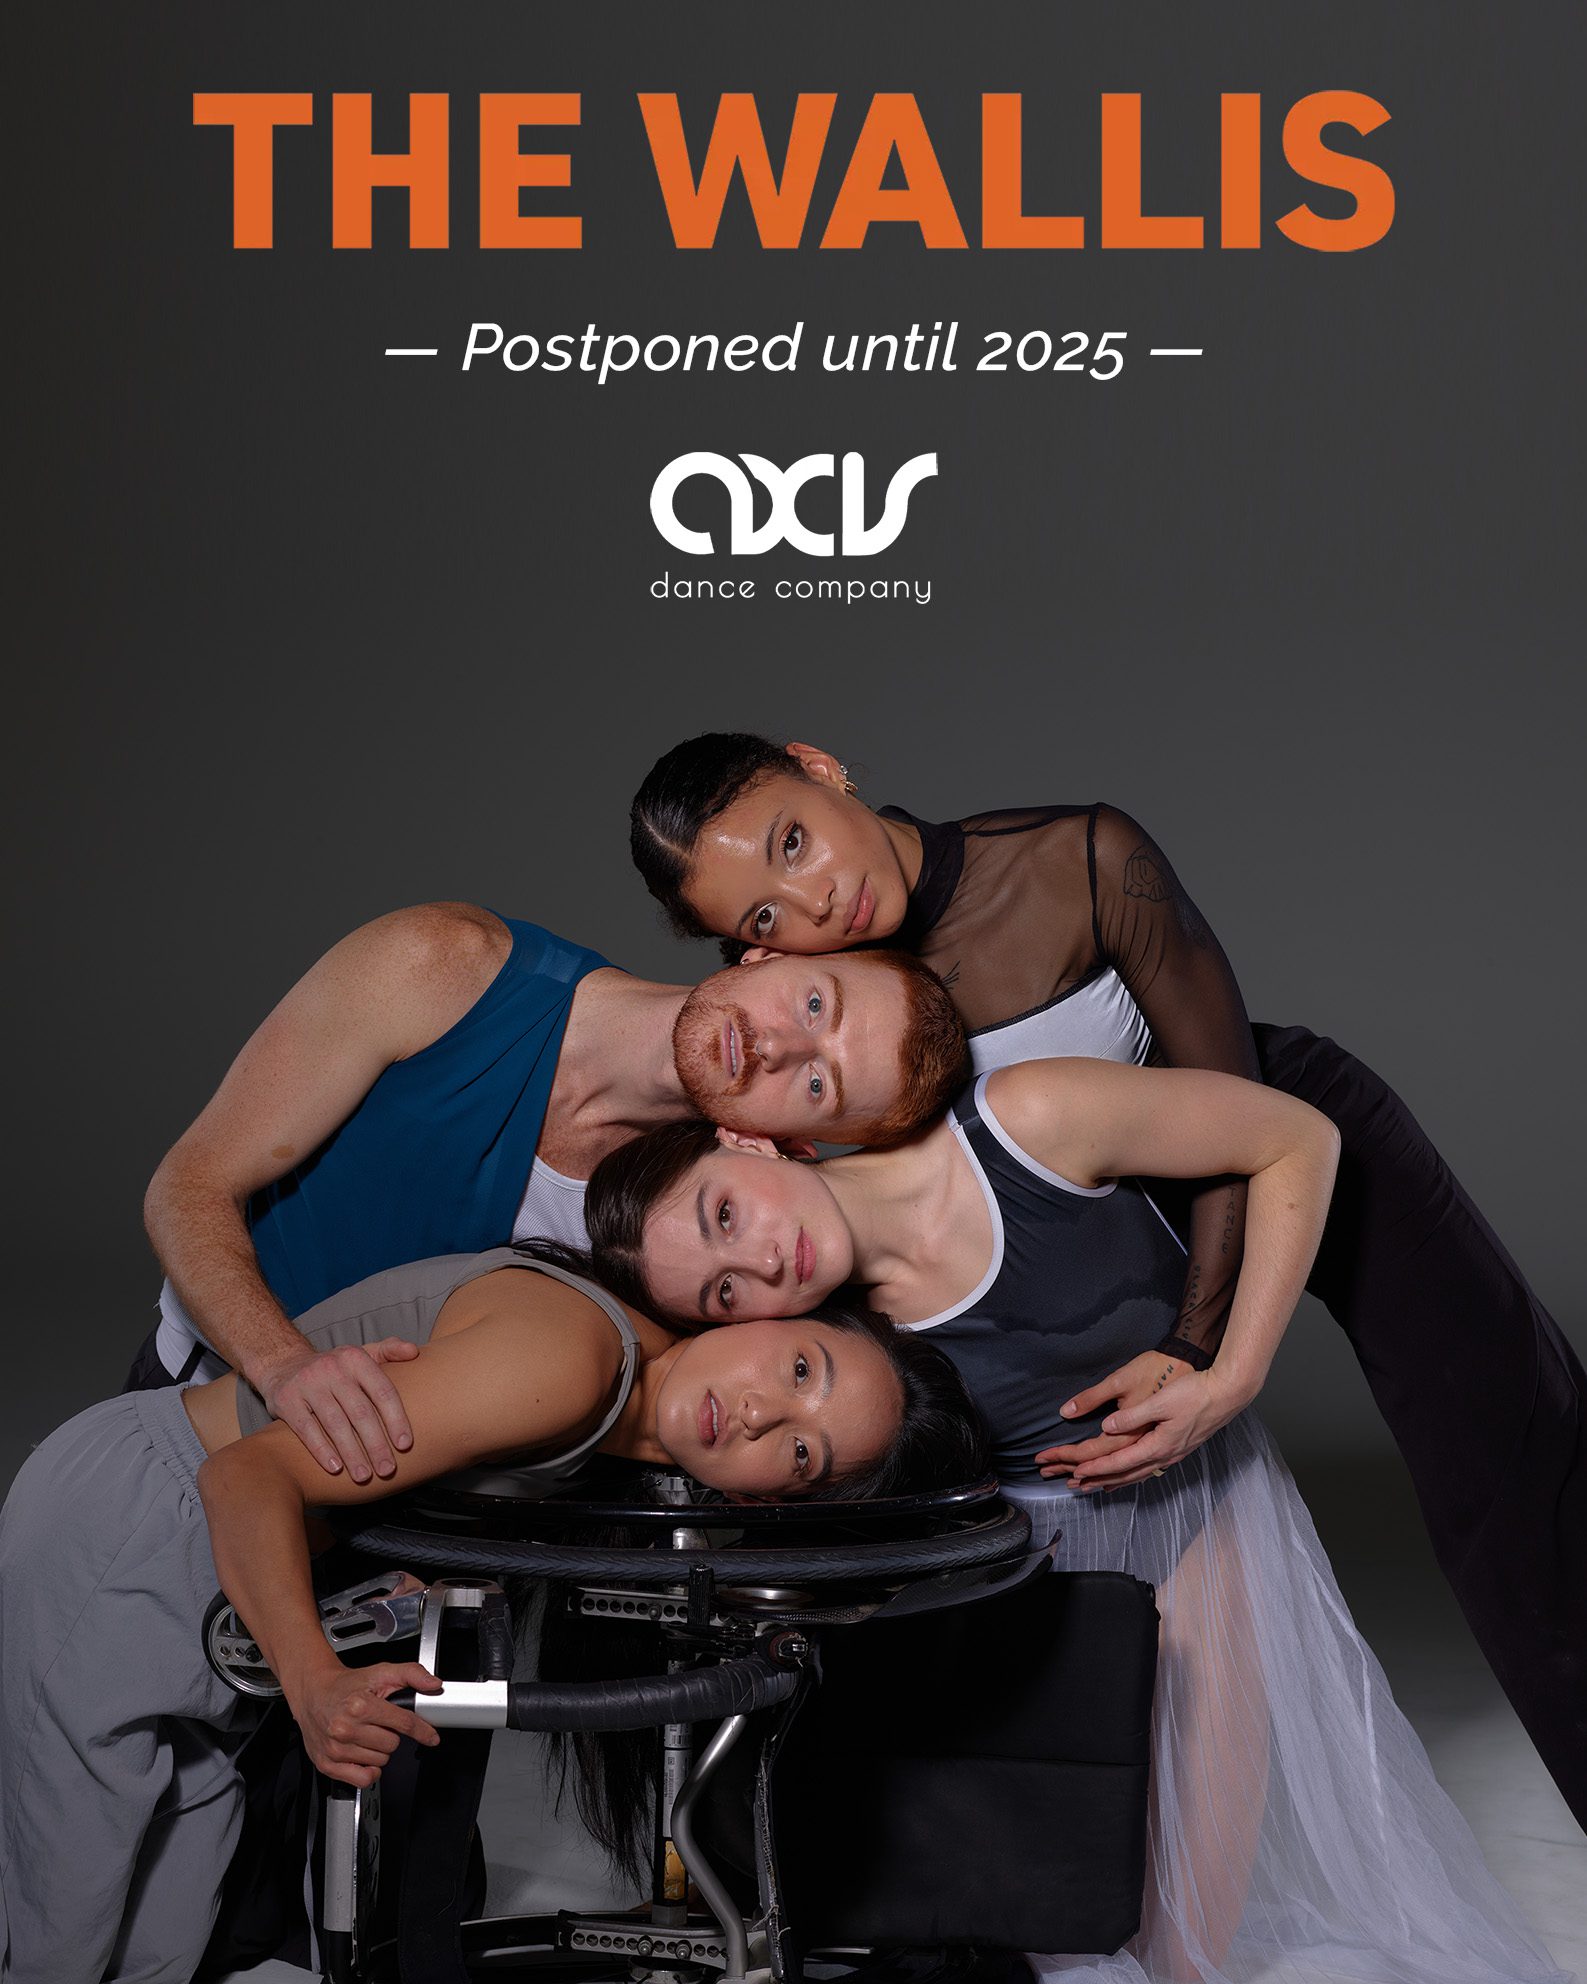 Four dancers stack their heads on top of each other with tenderness; Julie places her head on a wheel of her wheelchair at the bottom, which is turned over on it's side. The dancers wear costumes in grey, blue and iridescent white on a grey background; text reads "Postponed until 2025" with the Wallis and AXIS logos.